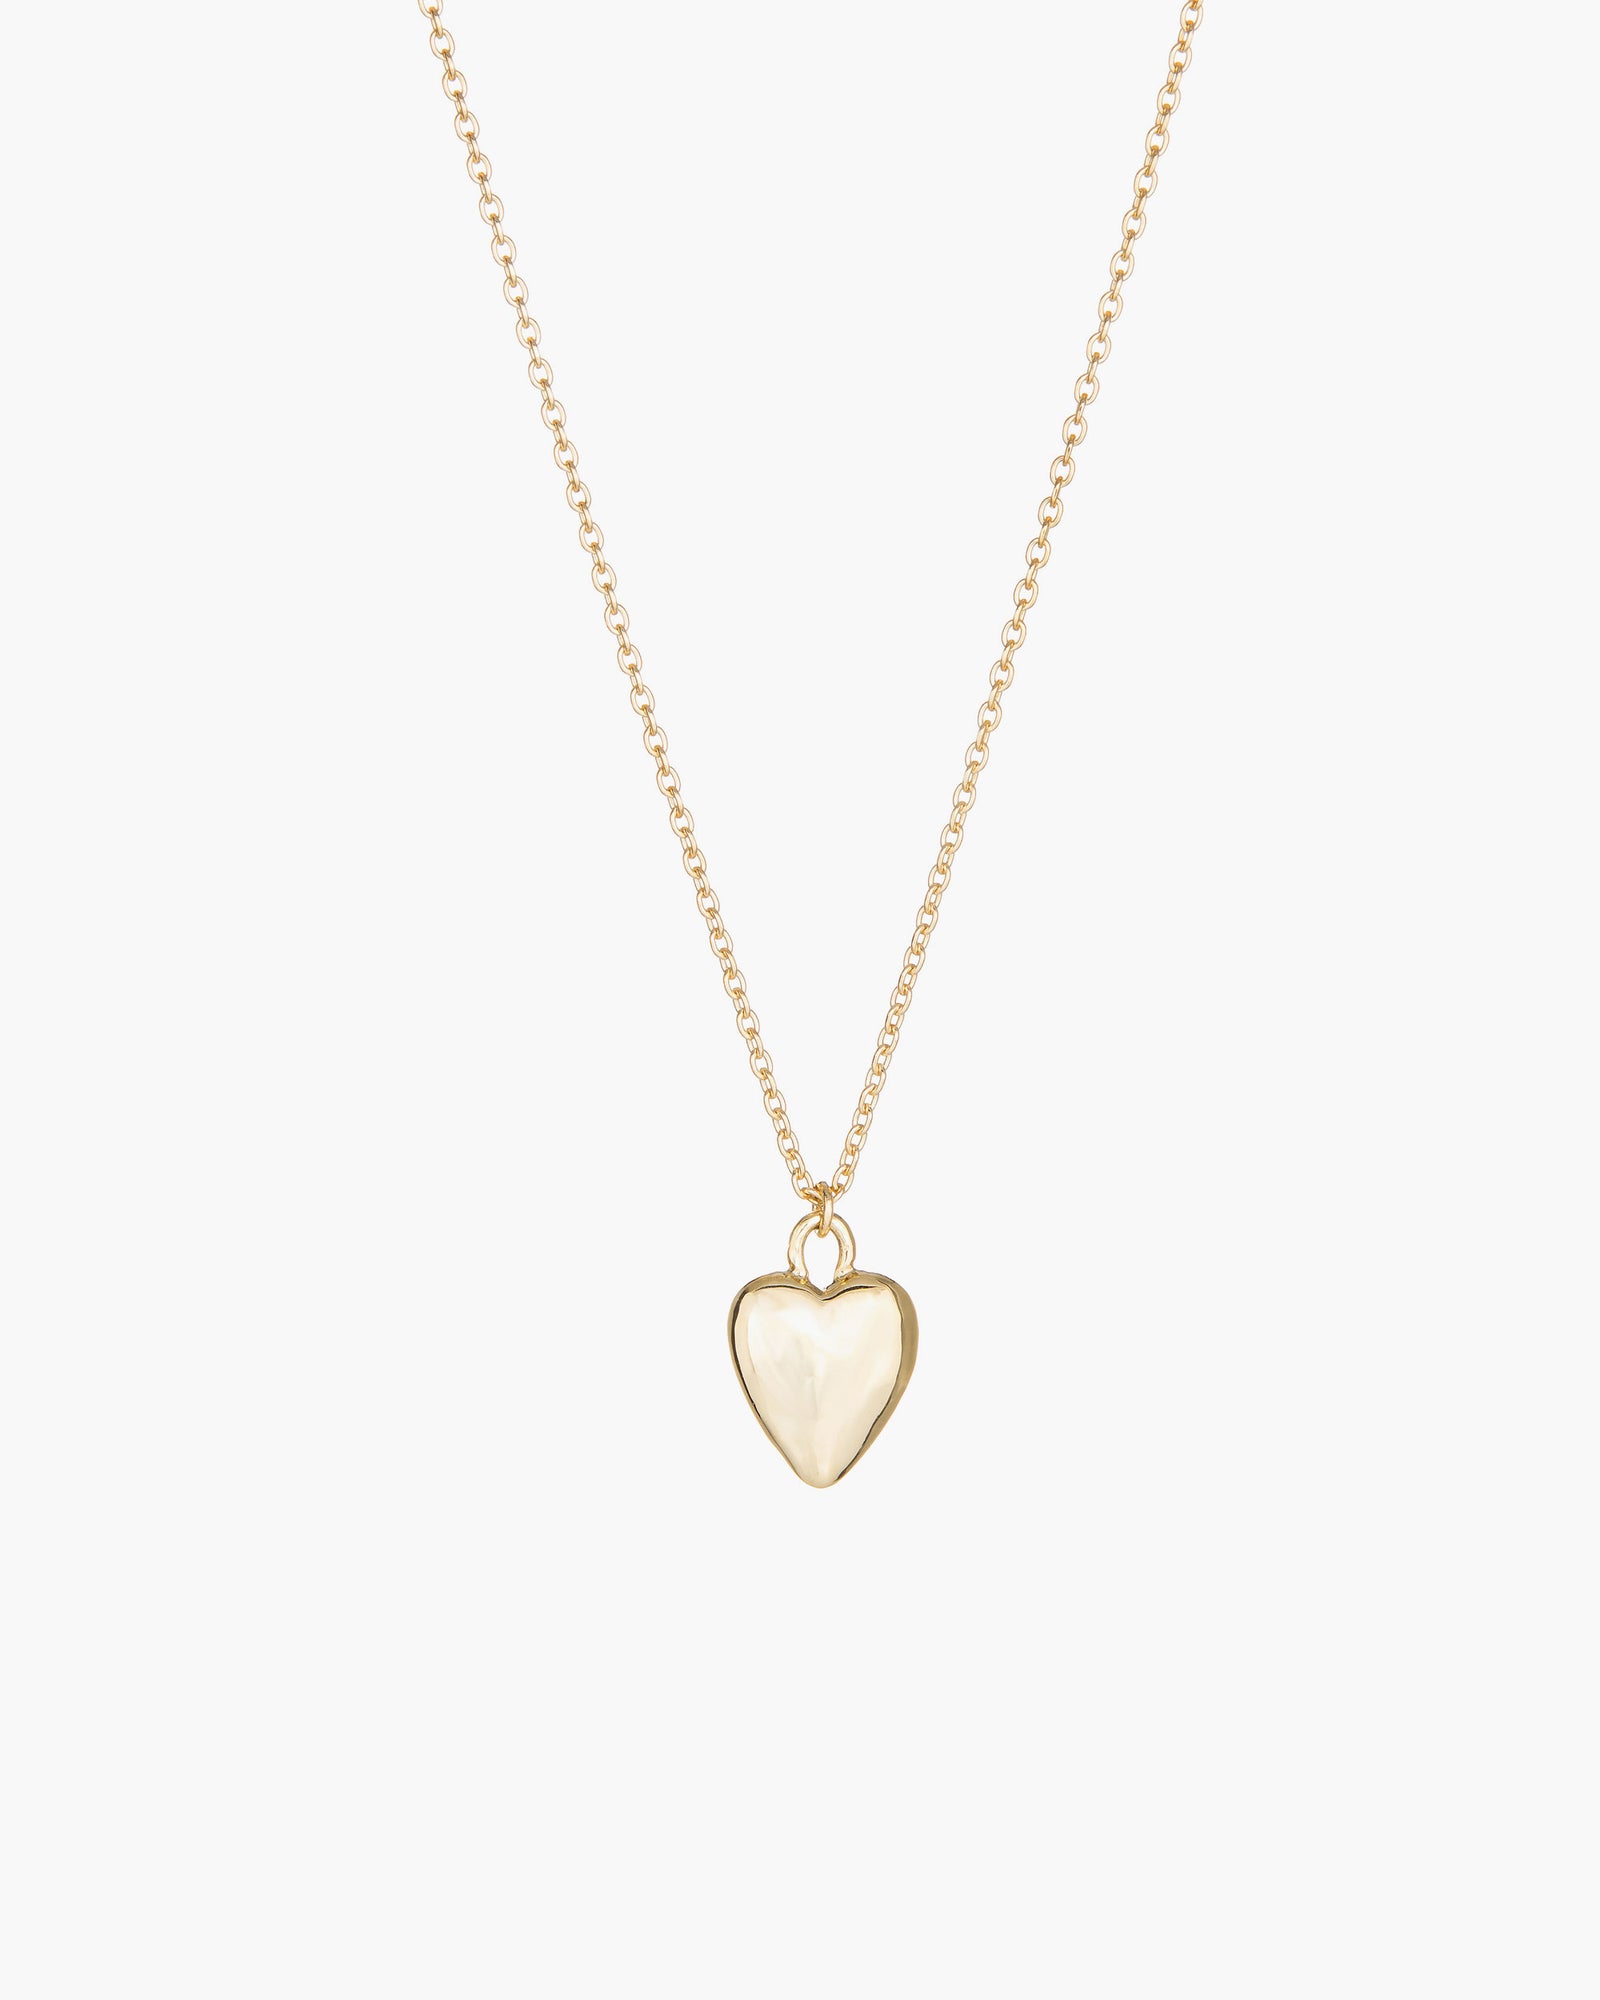 Tewiky Cute Heart Necklace Gold Heart Pendant Choker Necklaces Small Gold  Love Open Heart Chain Necklace